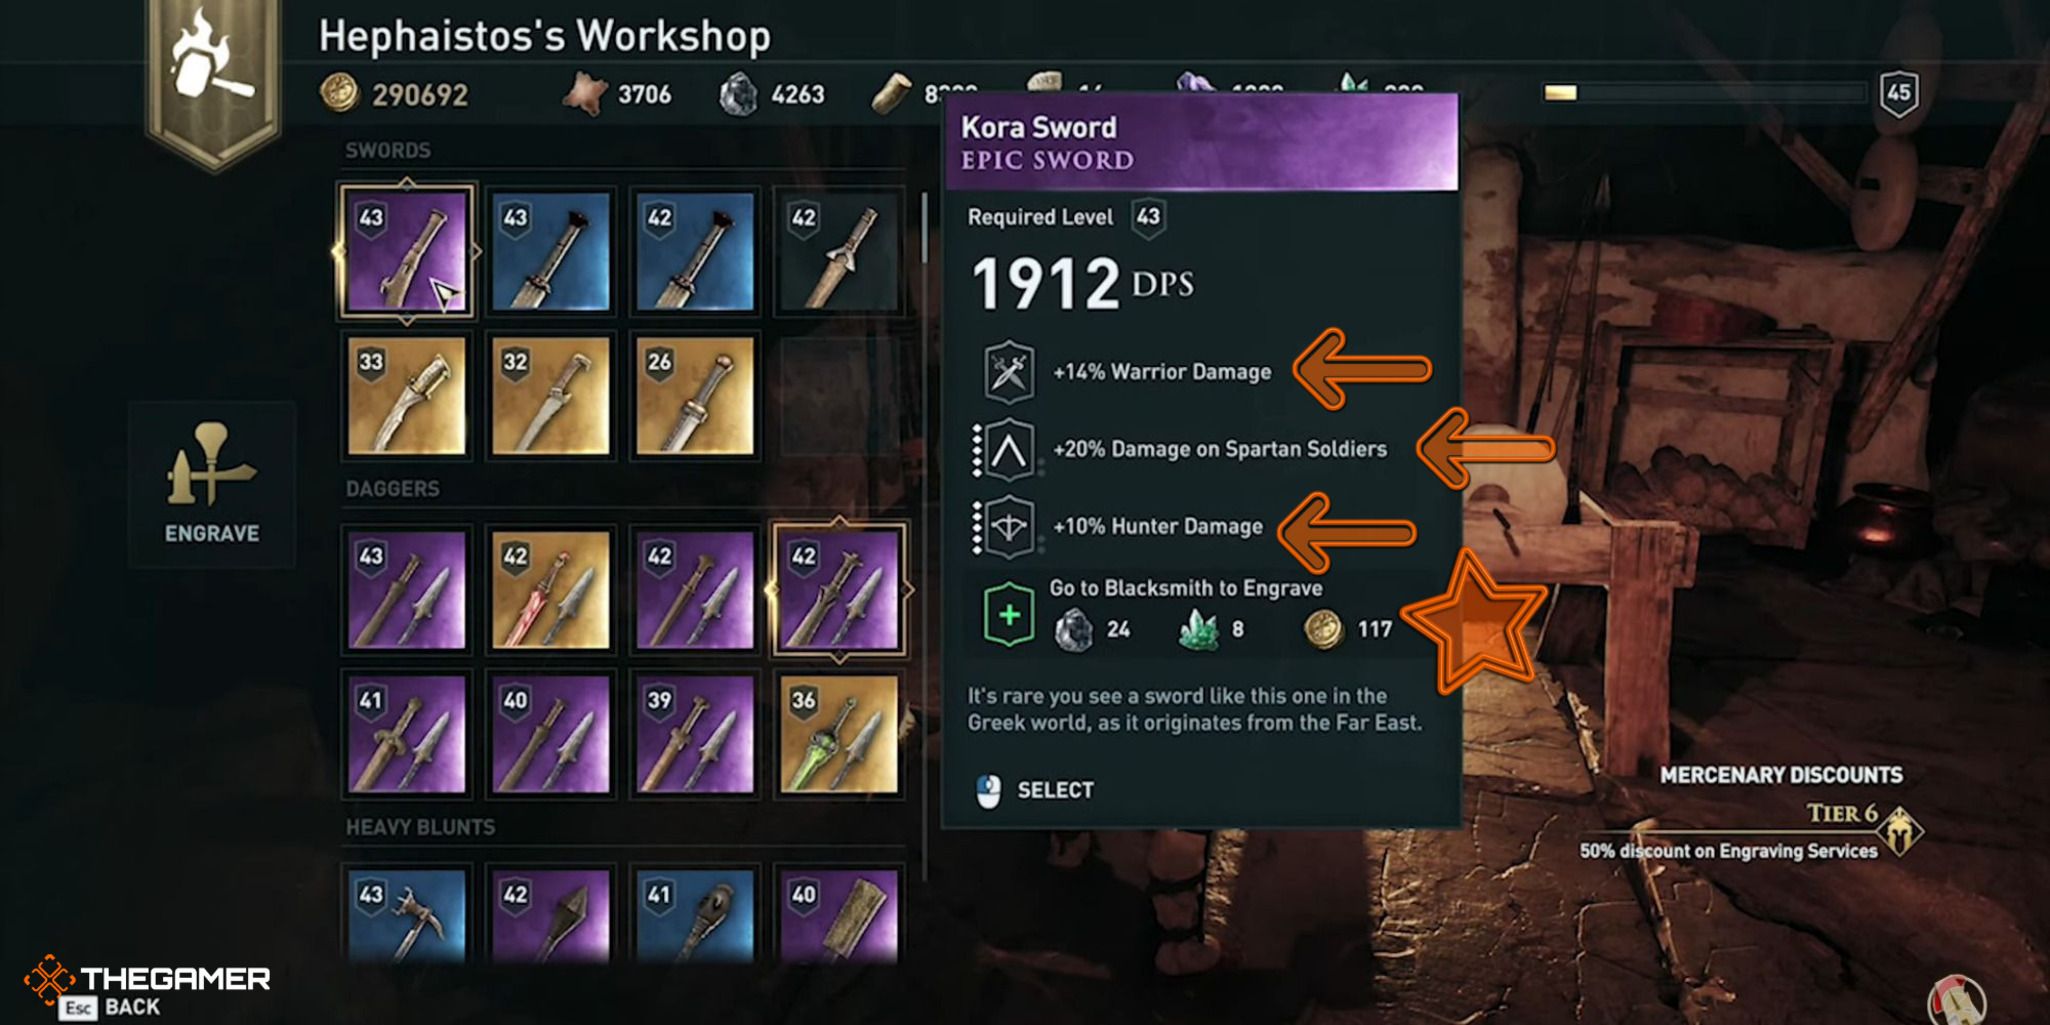 A screenshot showing the Epic weapon Kora Sword, different engraving options, and their costs.